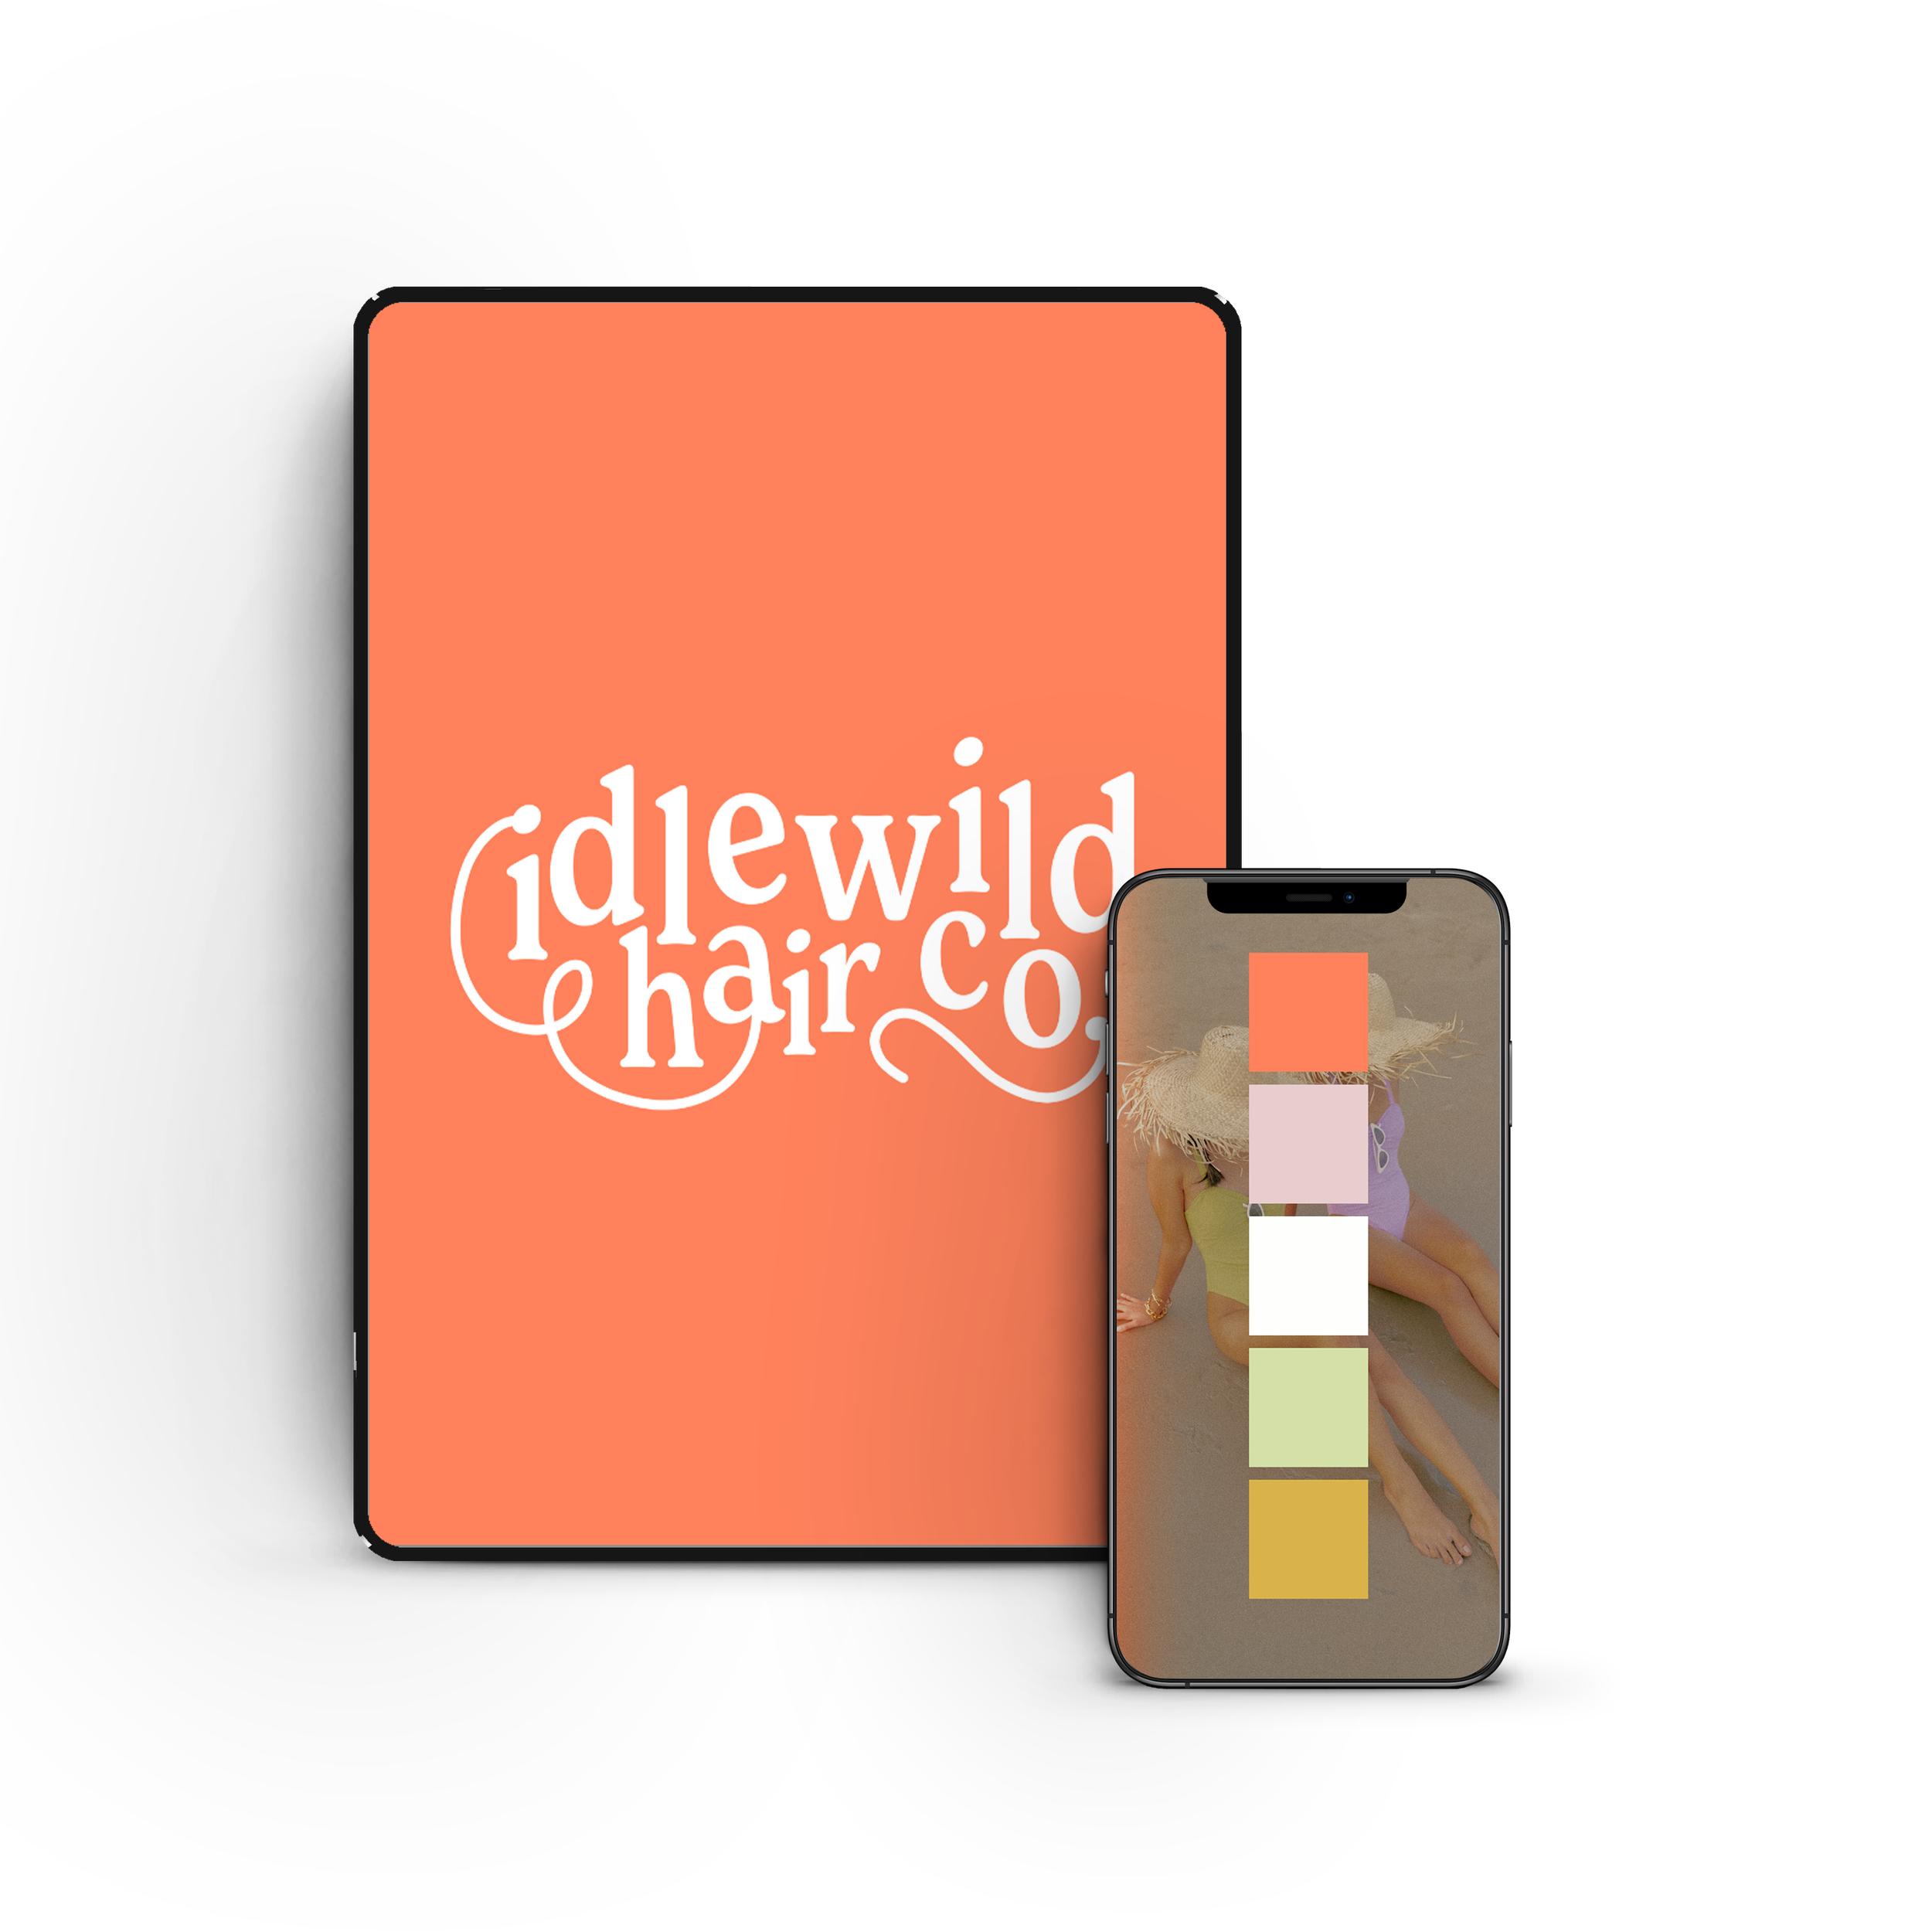 COMPLETE Idlewild Hair Co Mockup.png